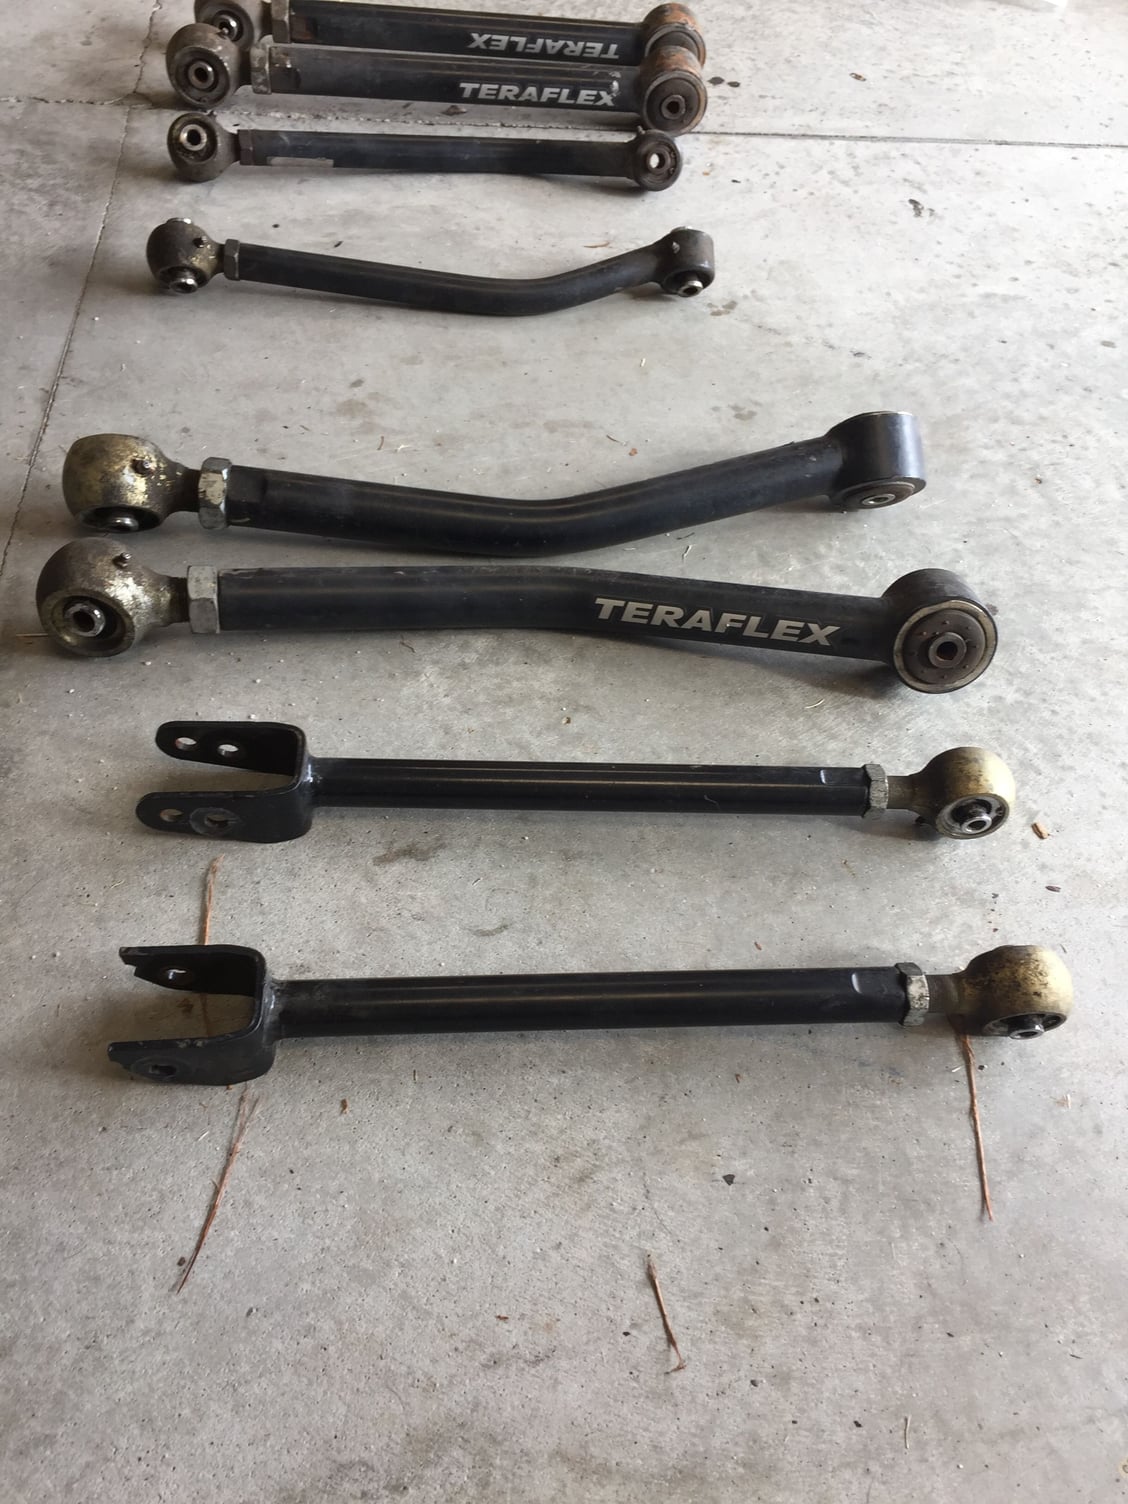 Steering/Suspension - Terraflex ccontrol arms - Used - 2008 to 2017 Jeep Wrangler - Aberdeen, NC 28315, United States